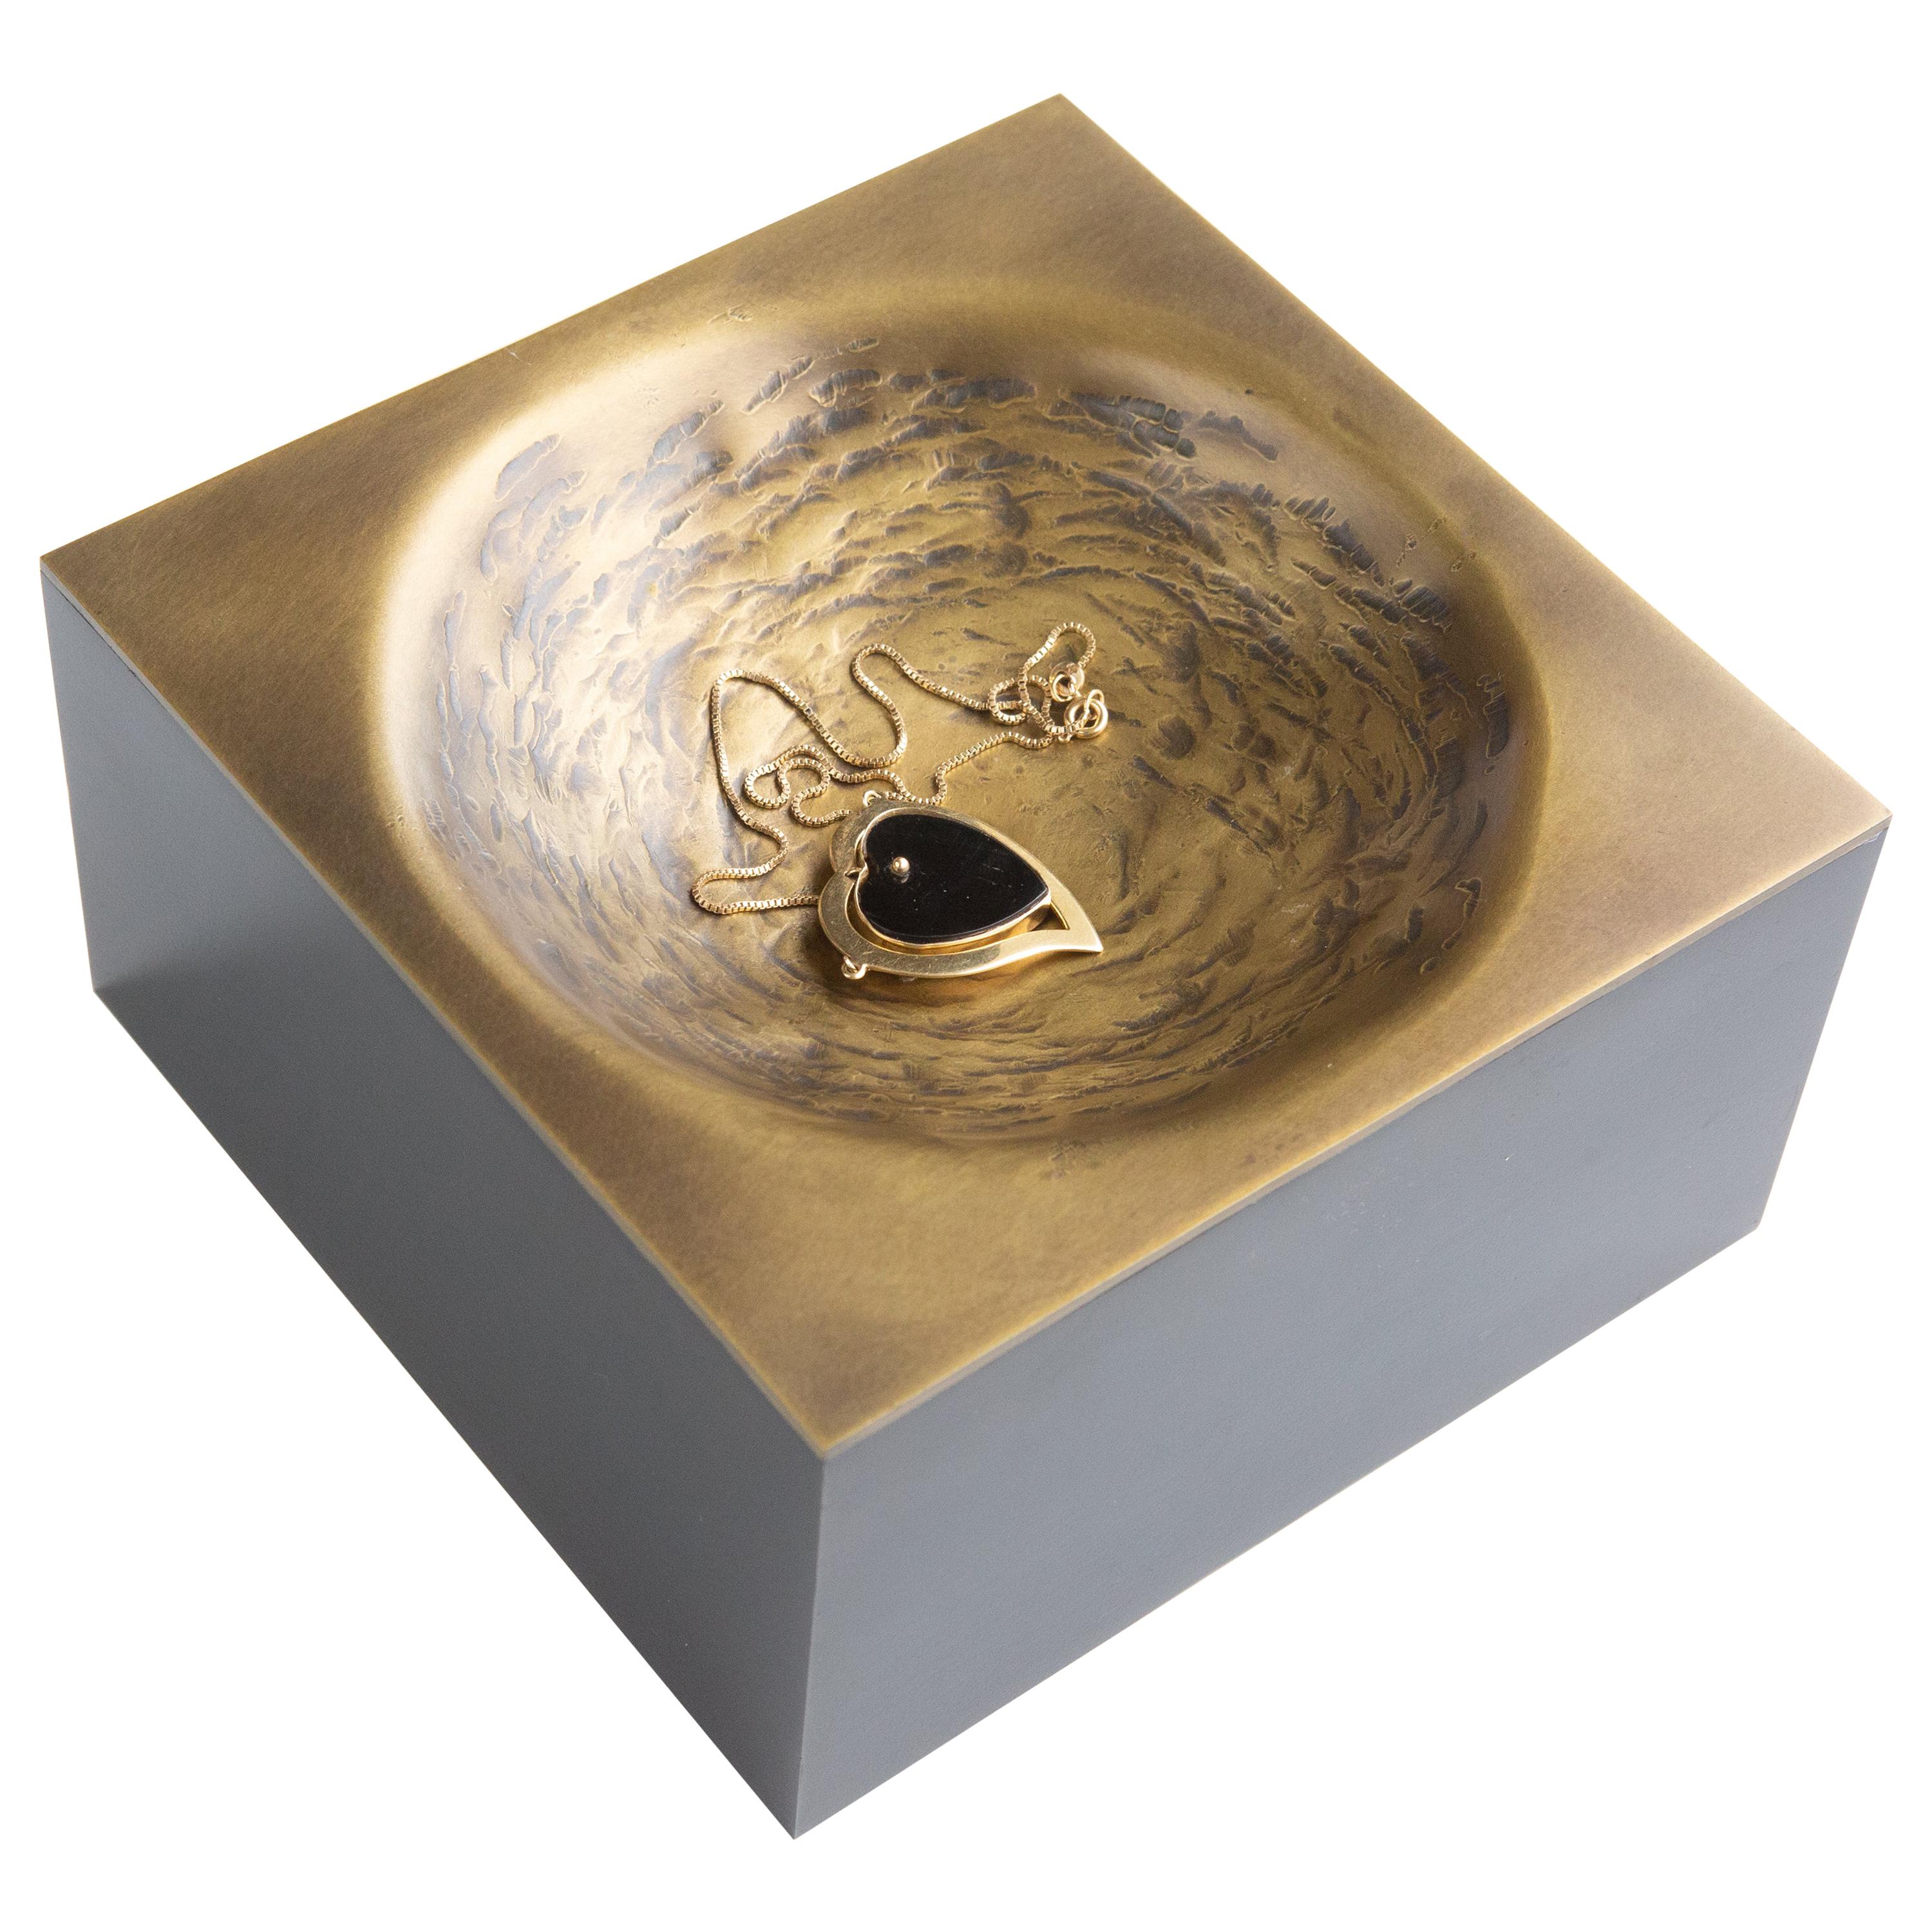 LIA 6" Square Handcraft Brass and Steel Valet Bowl Tray by Soraya Osorio